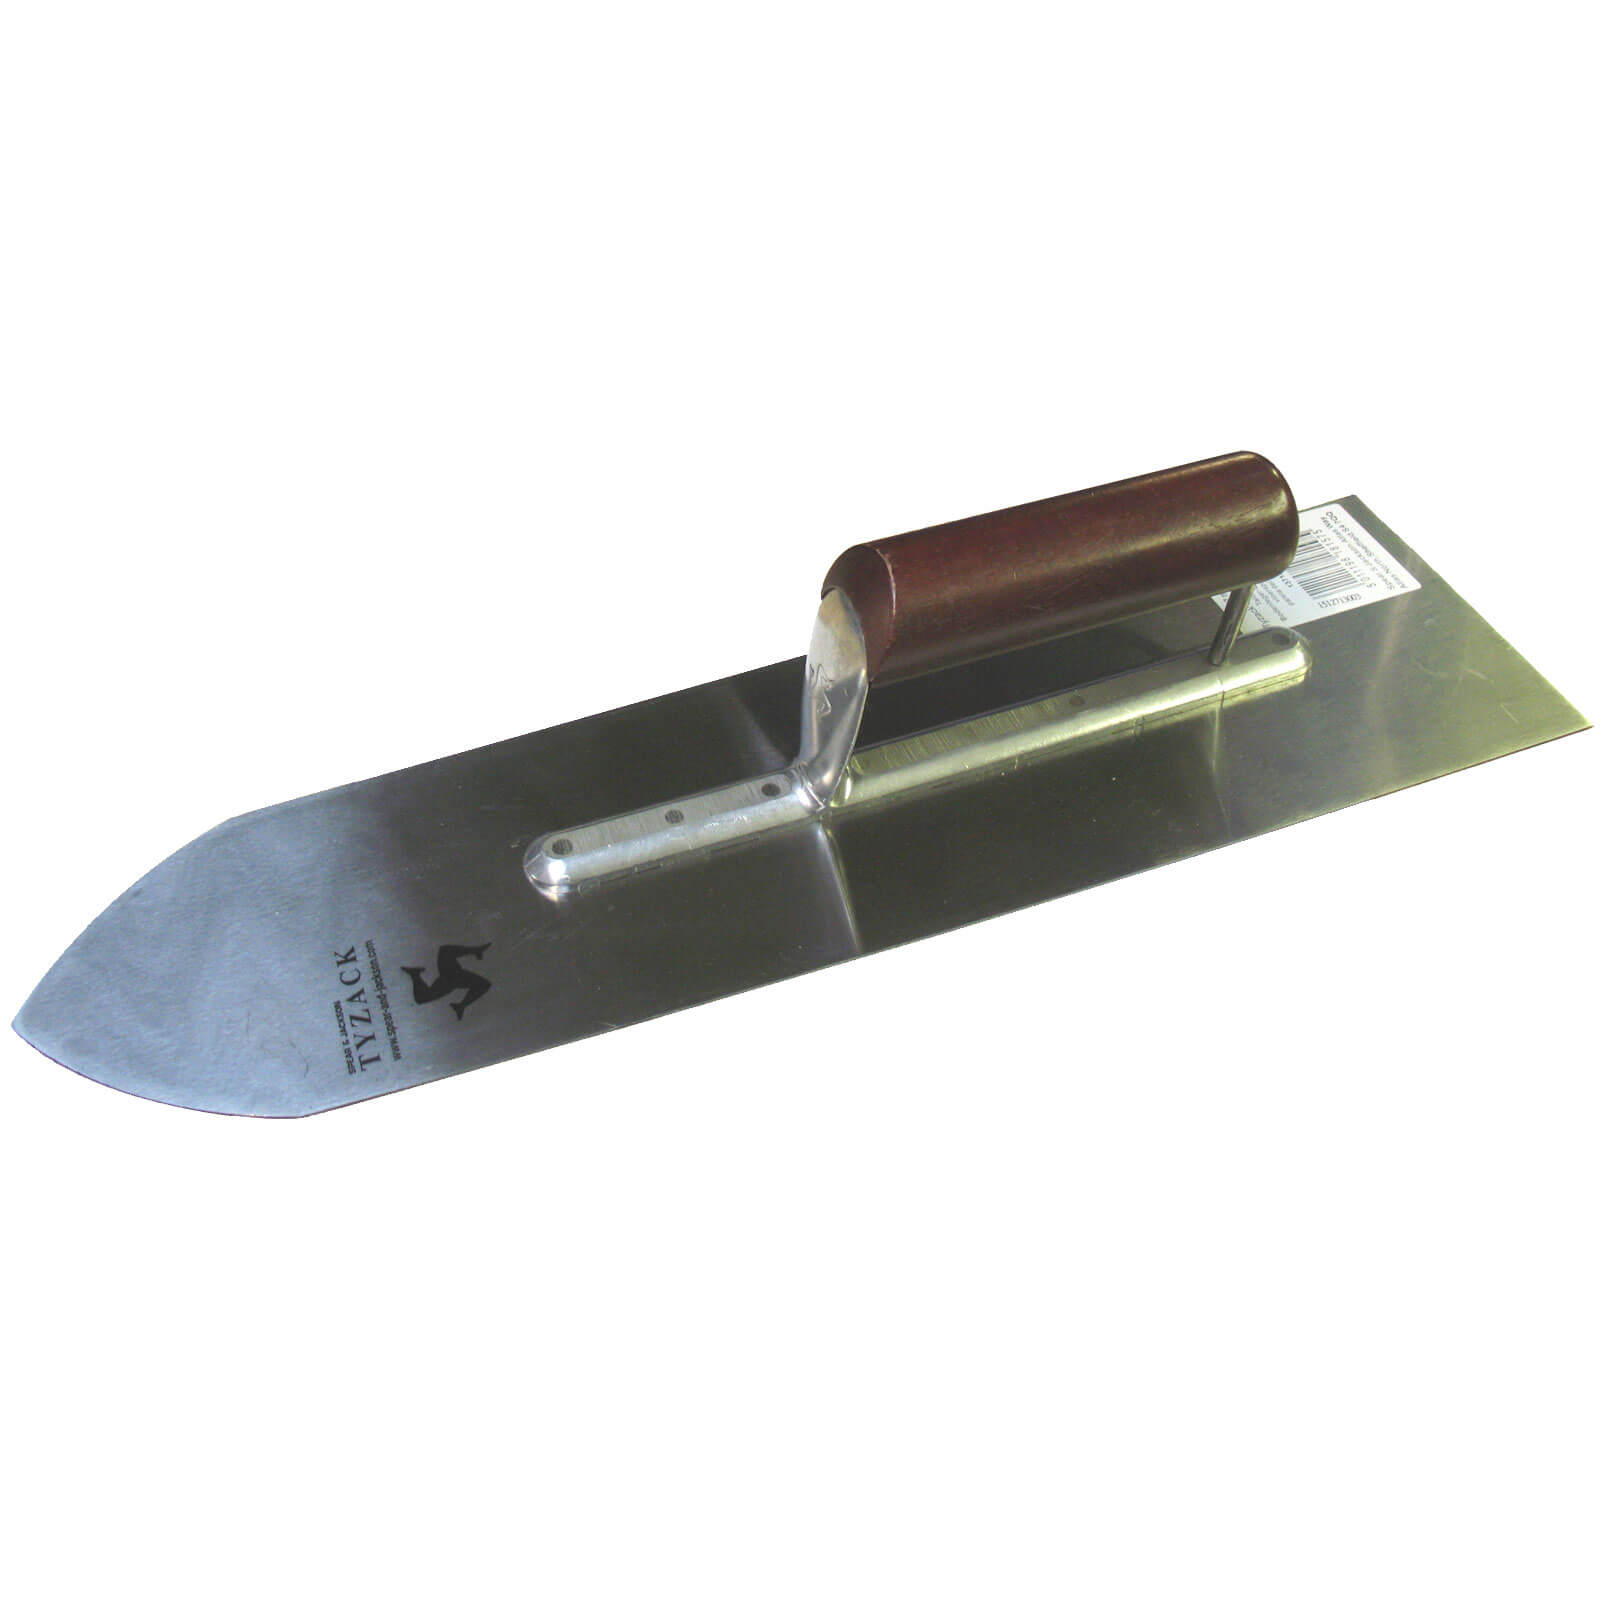 WHS Tyzack Flooring Trowel Double Hang with Wooden Handle 18"